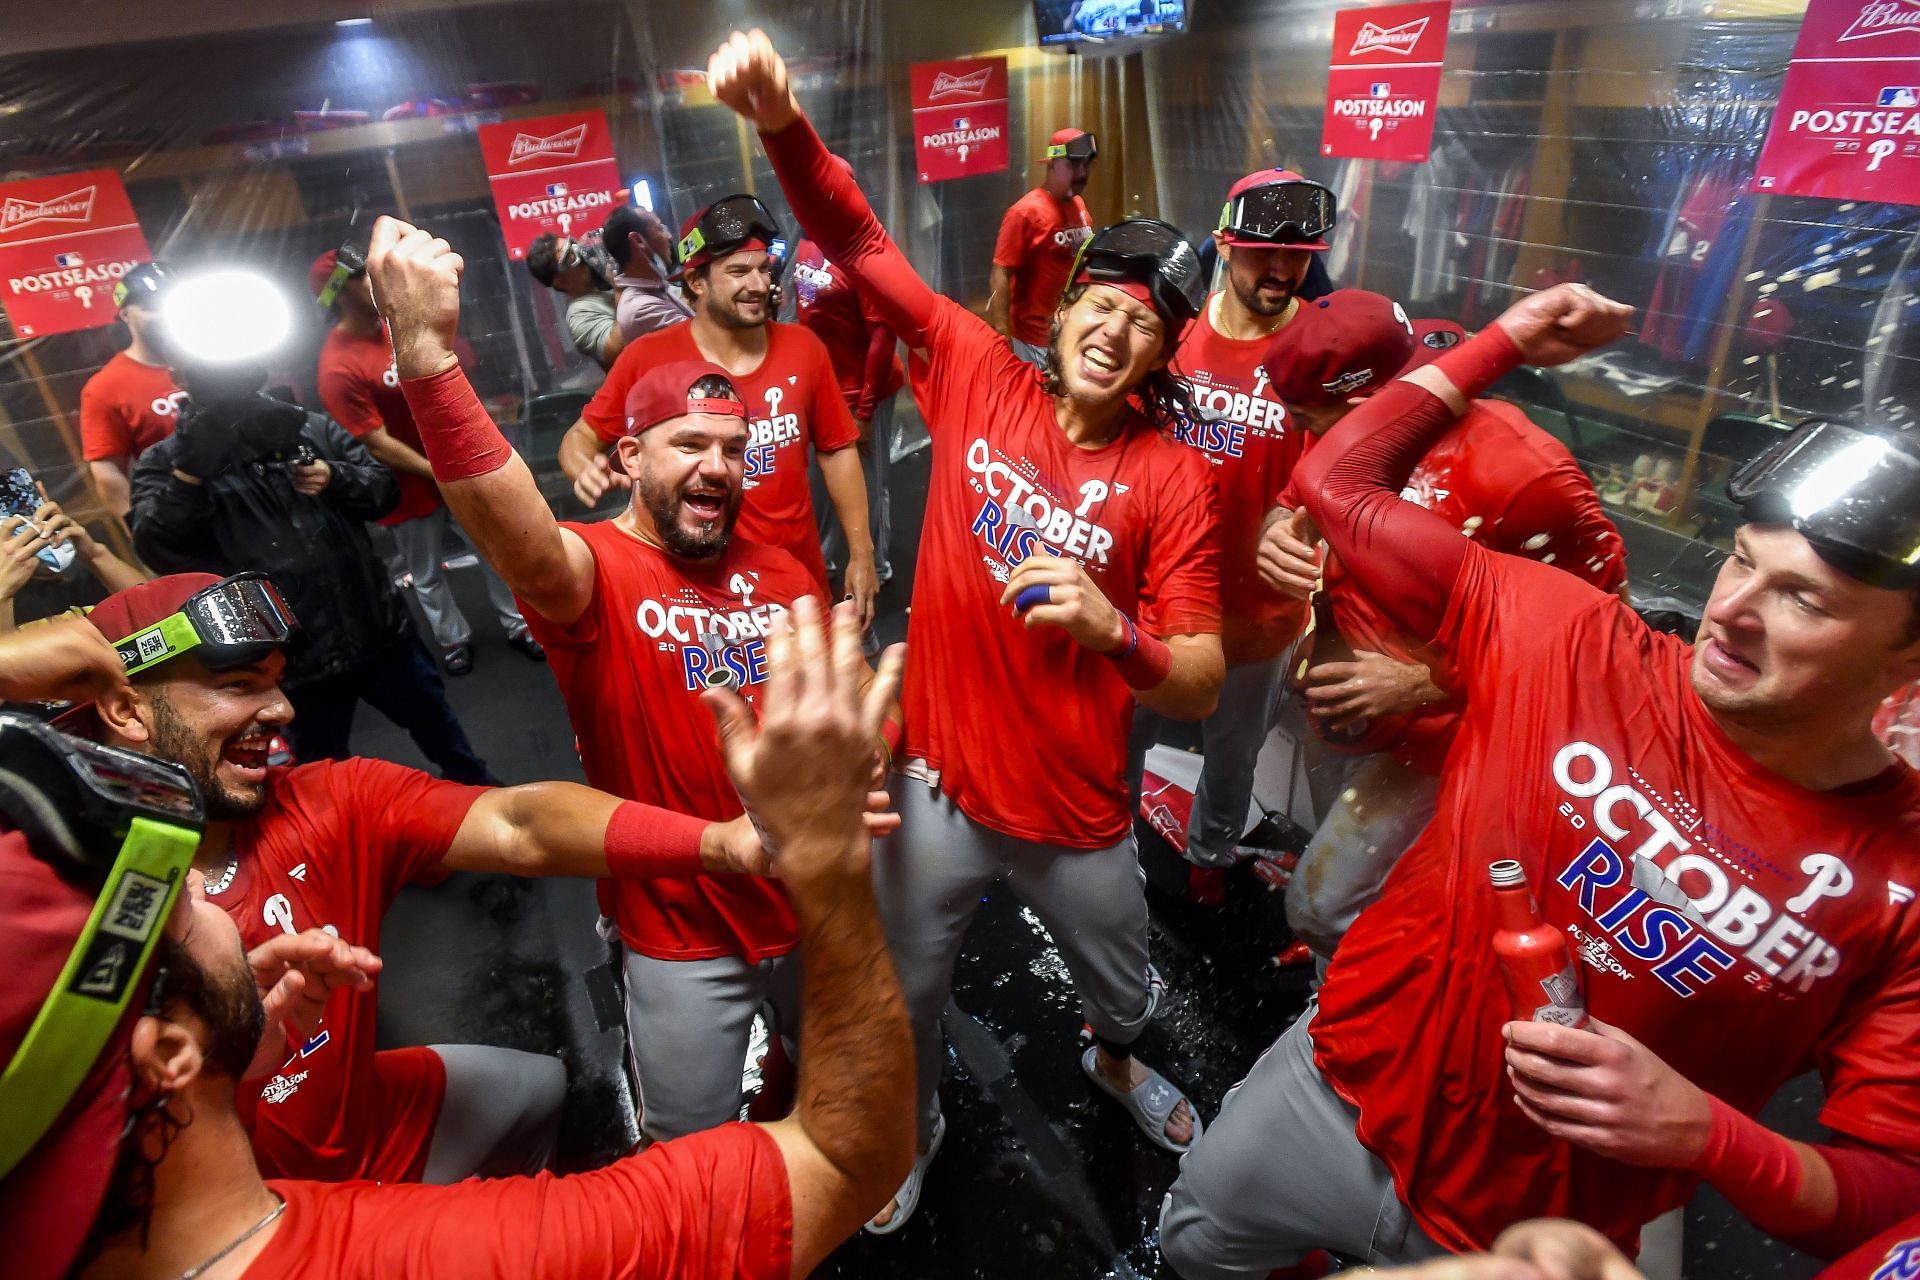 How The Phillies Playoff Schedule Looks So Far: Tickets, Details, More